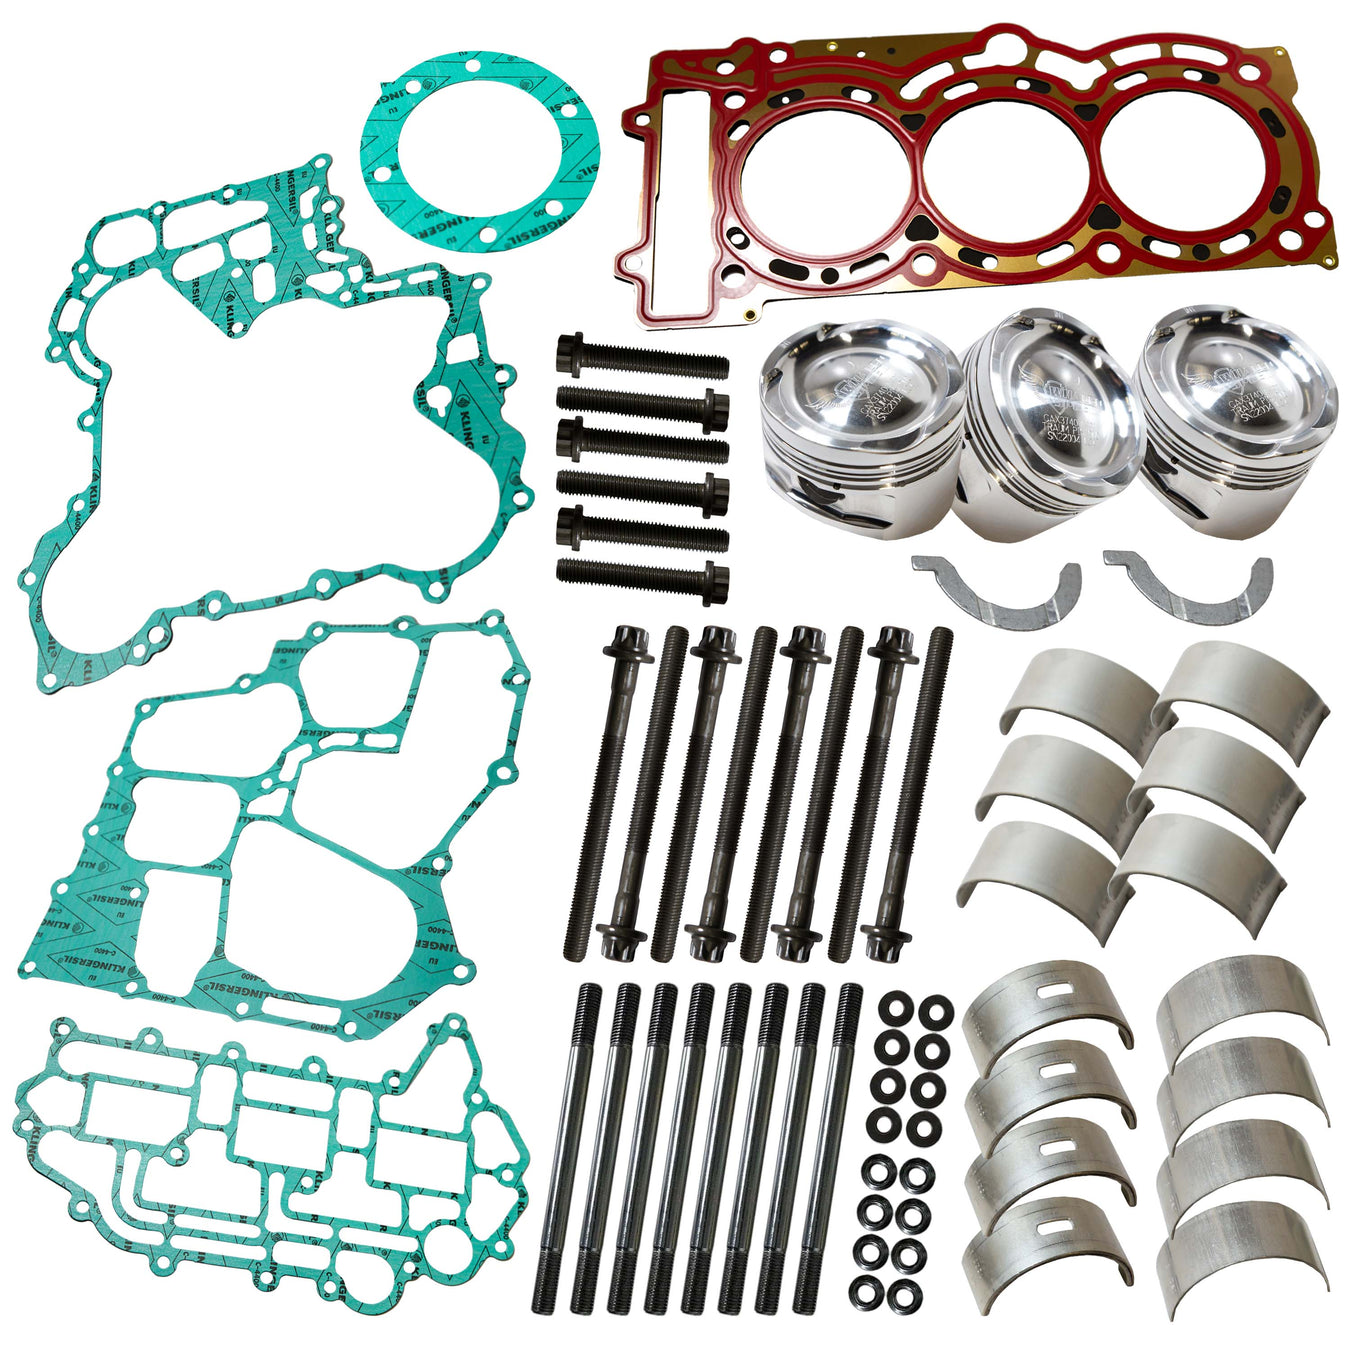 BRP Crankcase Related Products